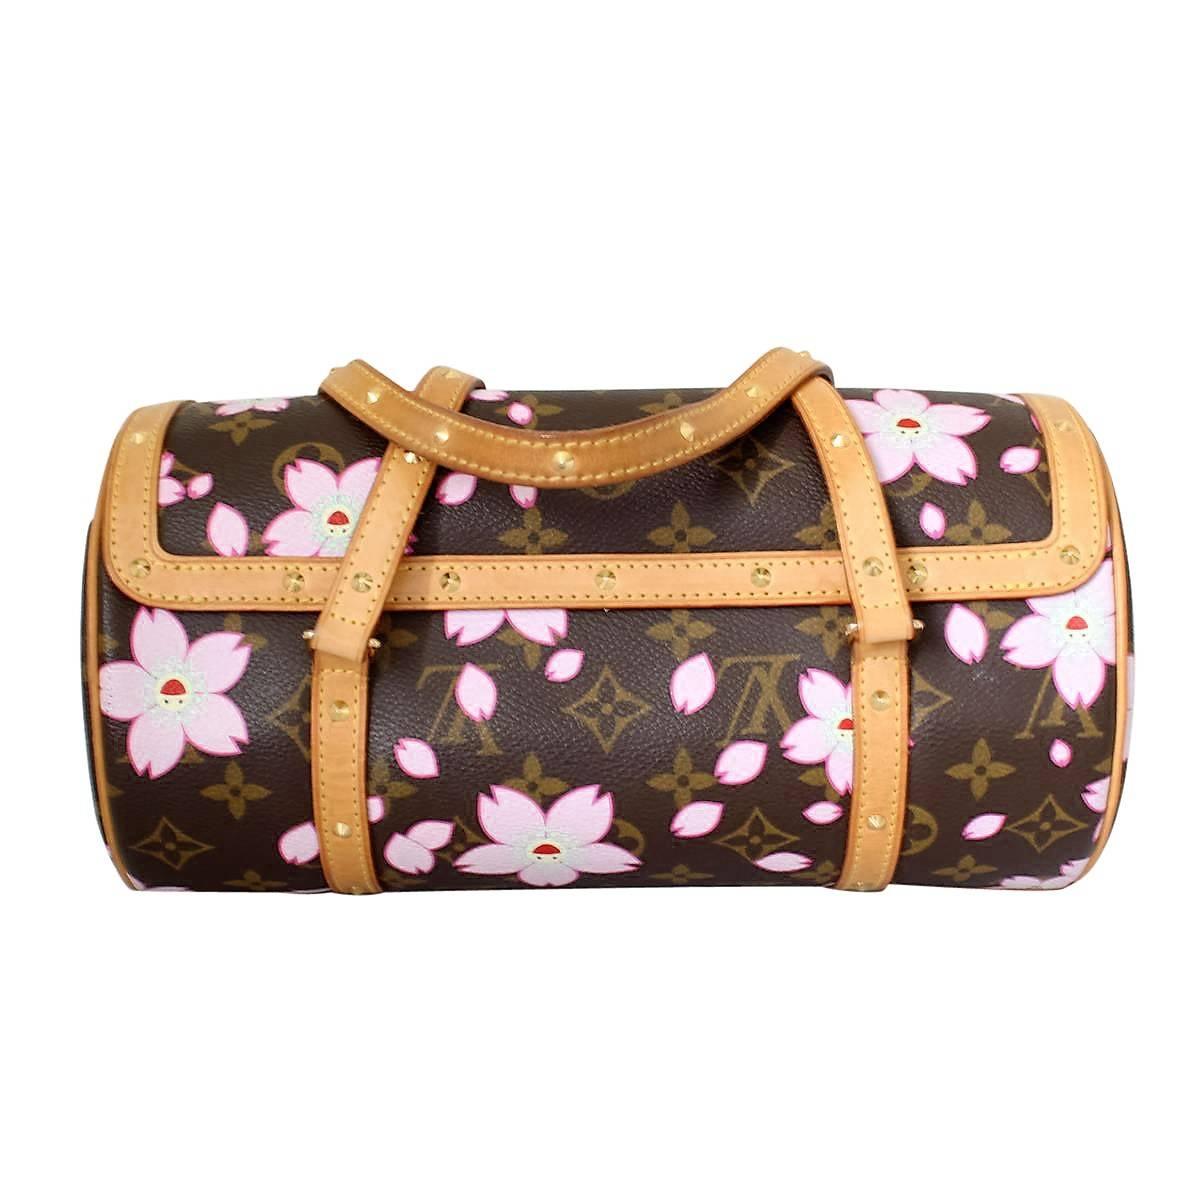 Amazing Louis Vuitton bag, 2003 Limited Edition
Monogram Cherry Blossom Papillon
Leather handles and inserts with golden studs
Monogram with pink flowers and happy expressions
Designed by Takashi Murakami
With locker and keys
Buttons